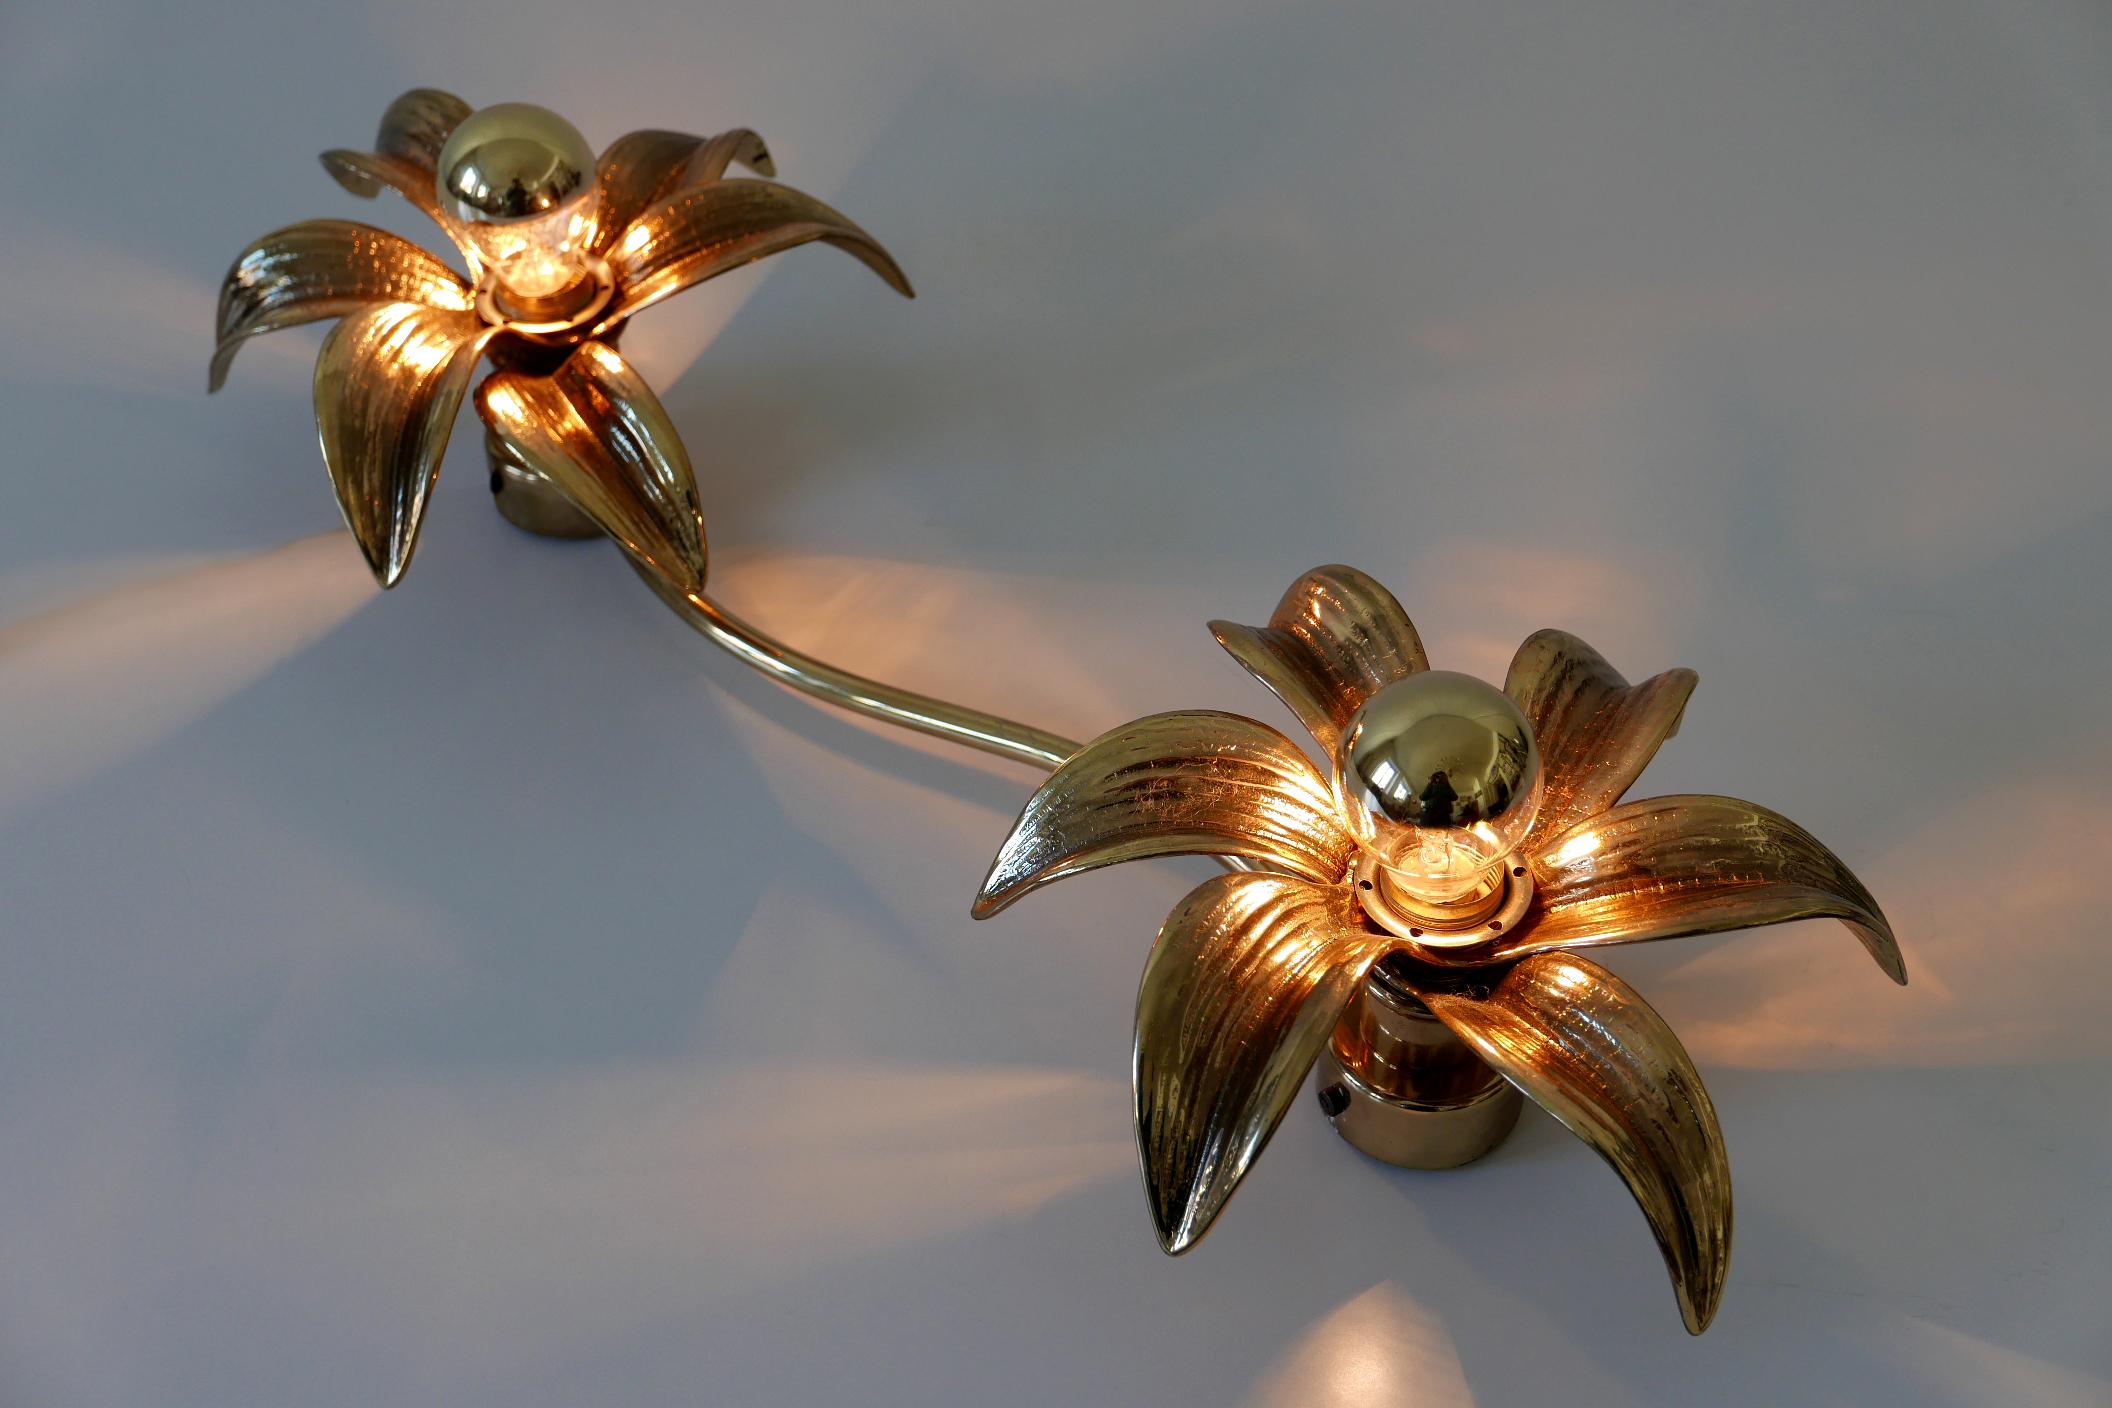 Amazing Mid-Century Modern floral two-armed brass ceiling fixture or wall lamp. Designed by Willy Daro for Massive Lighting, 1970s, Belgium. 

The lamp is executed massive cast brass and needs 2 x E14 / E12 Edison screw fit bulbs (better top